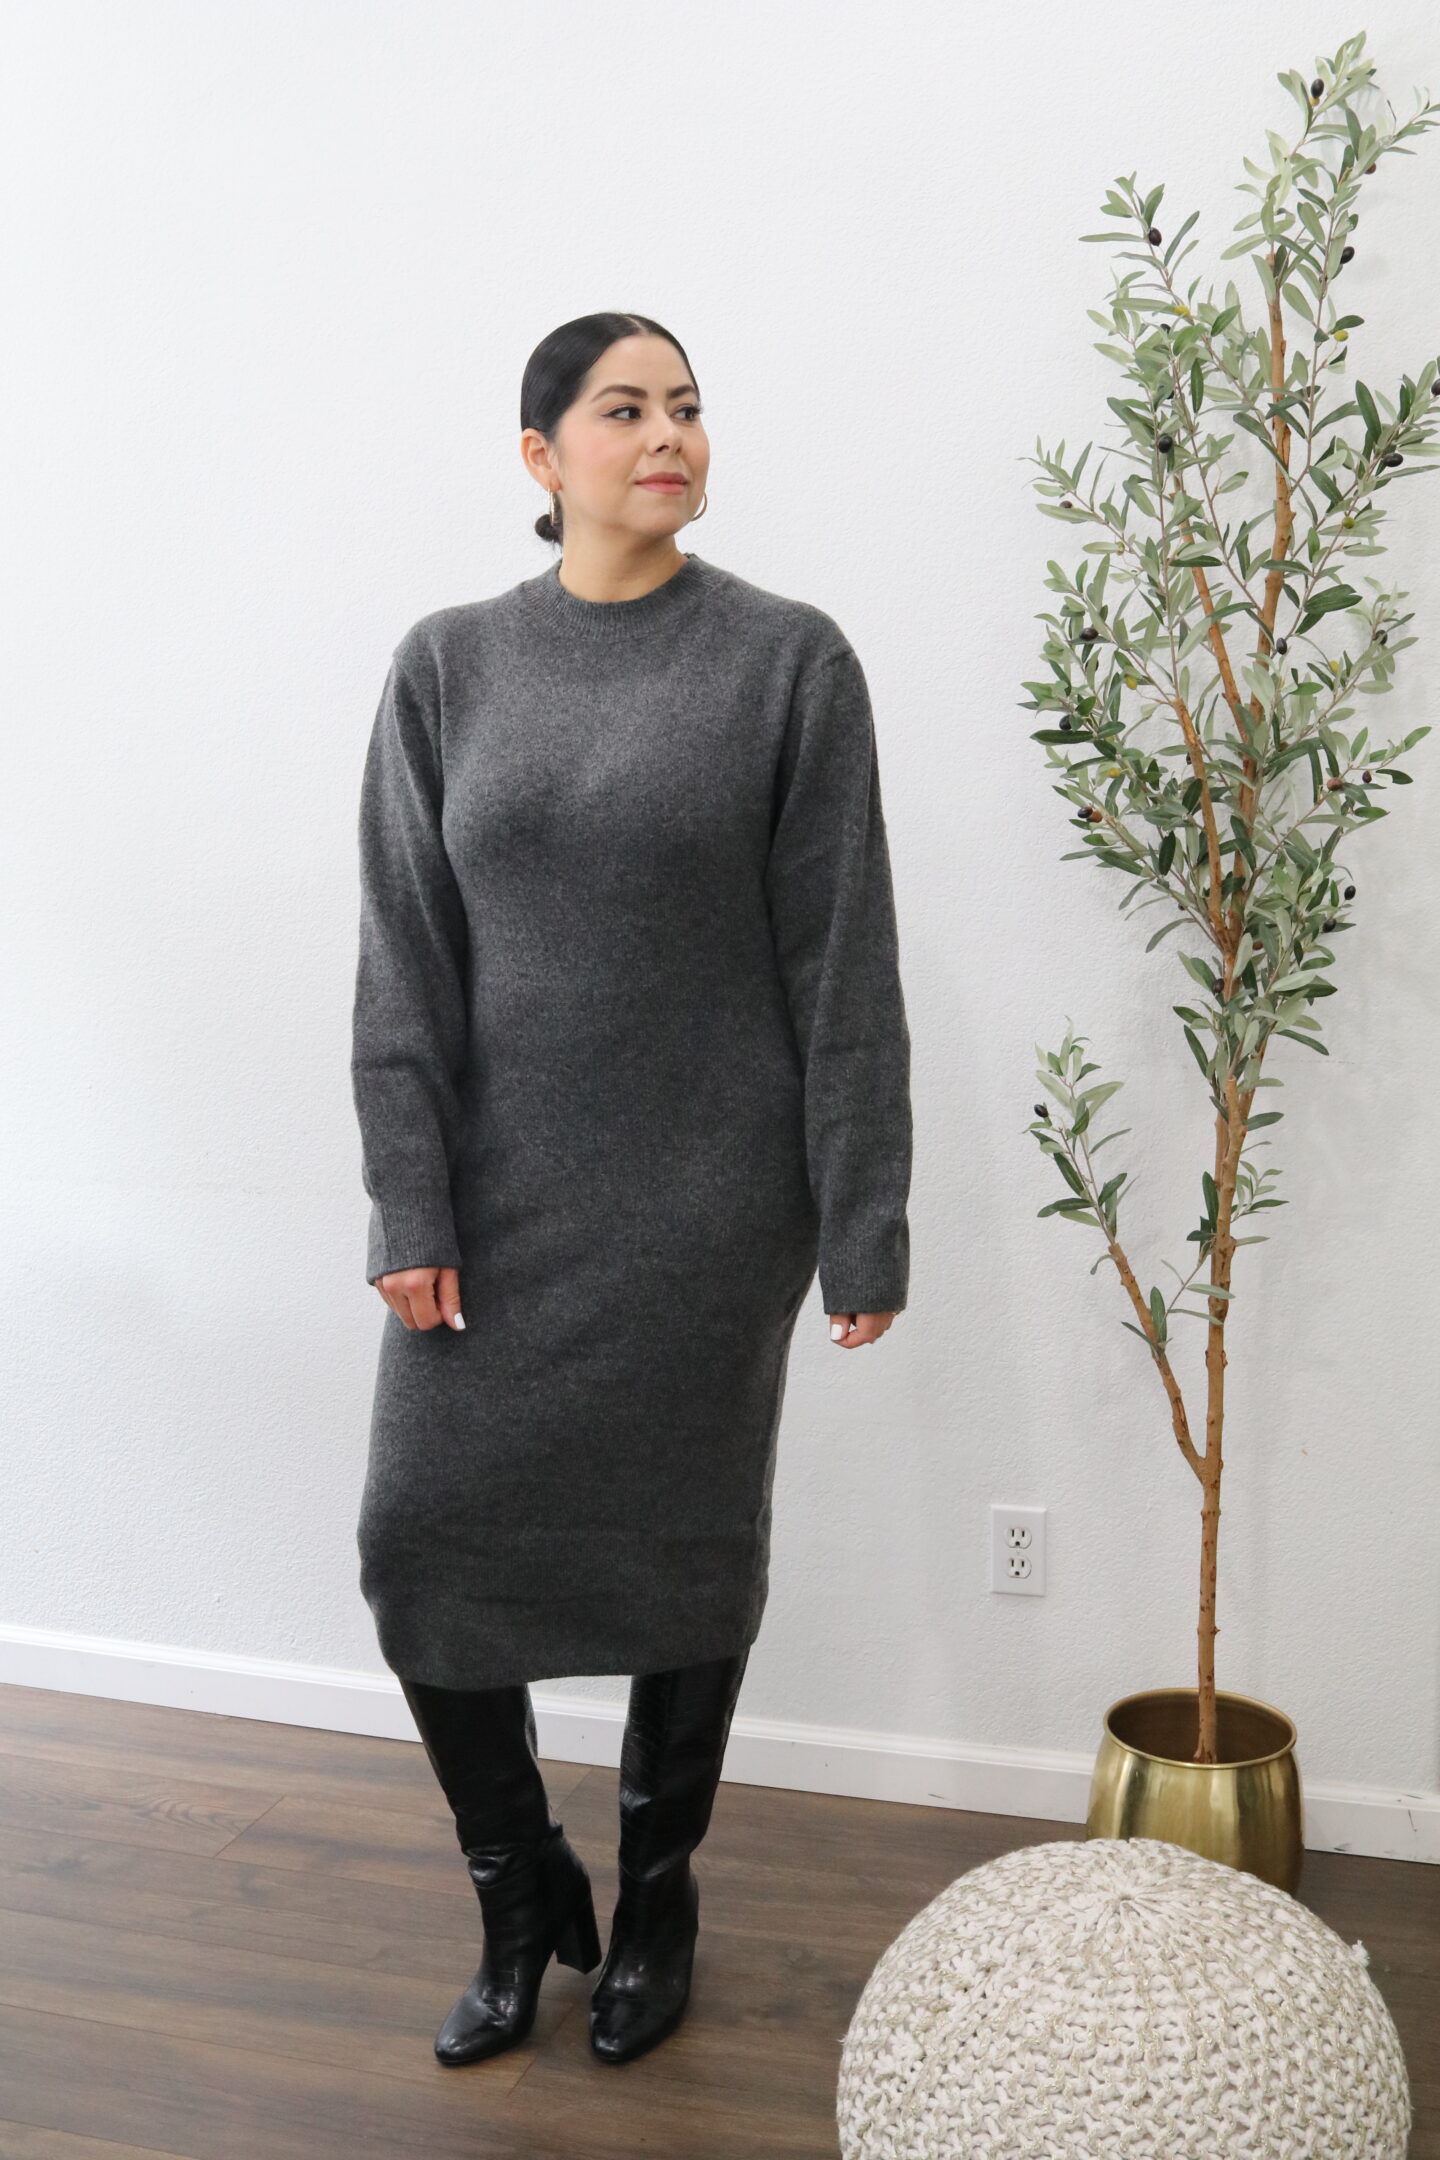 how to style croc embossed tall boots, winter workwear, cozy chic outfit idea with a midi sweater dress